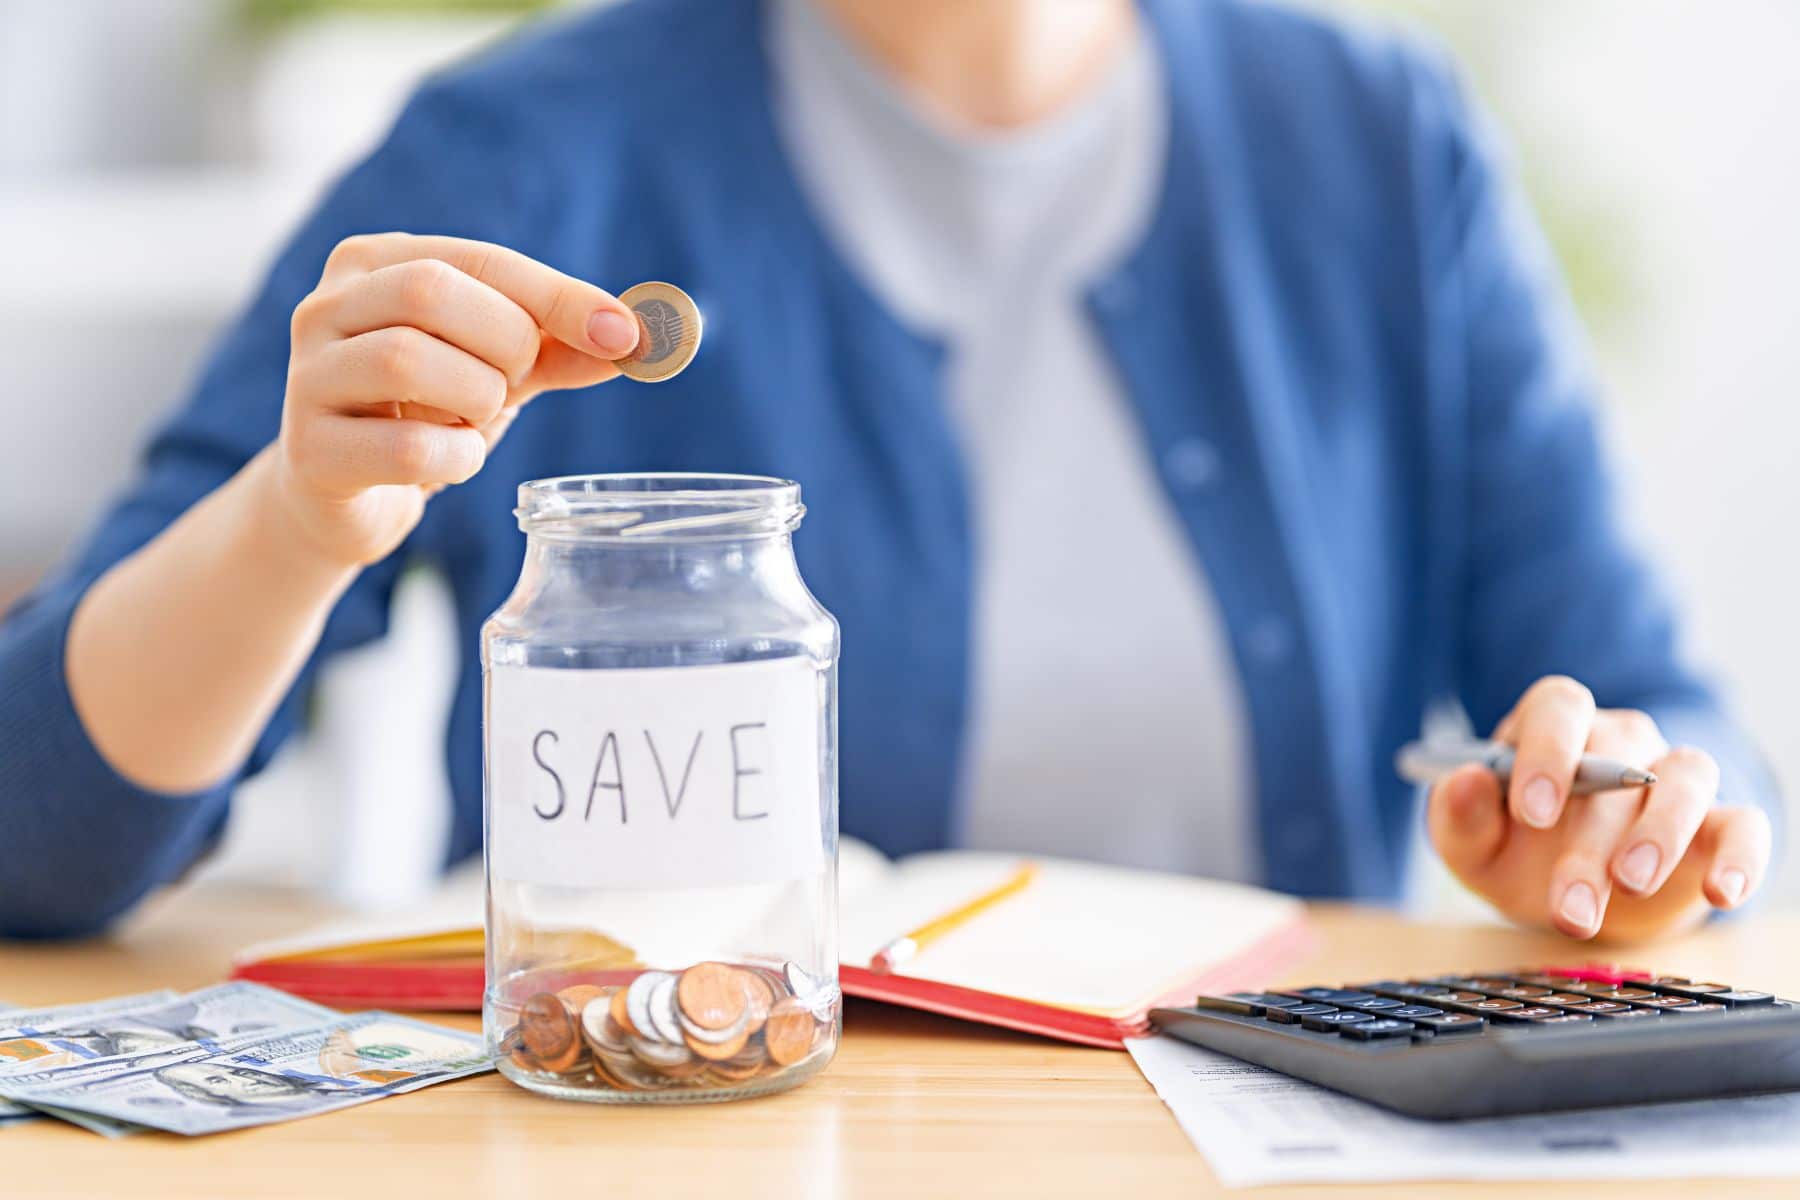 How To Save Money on a Tight Budget